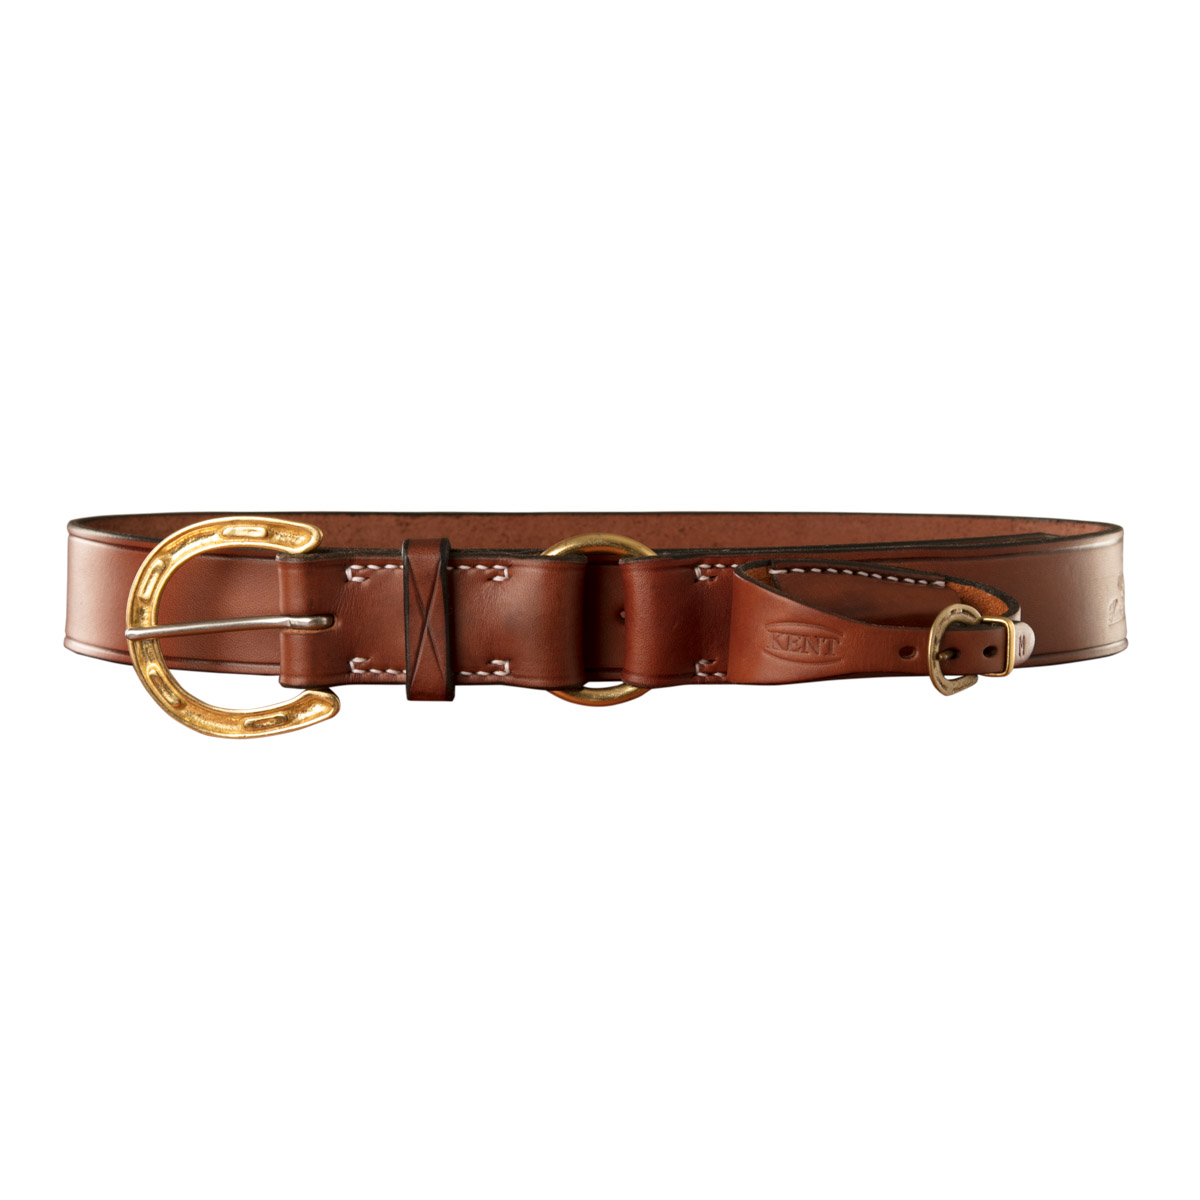 Stockmans Belt, Solid Leather, with Brass Horseshoe Buckle, Ring and Pouch for Pocket Knife 1